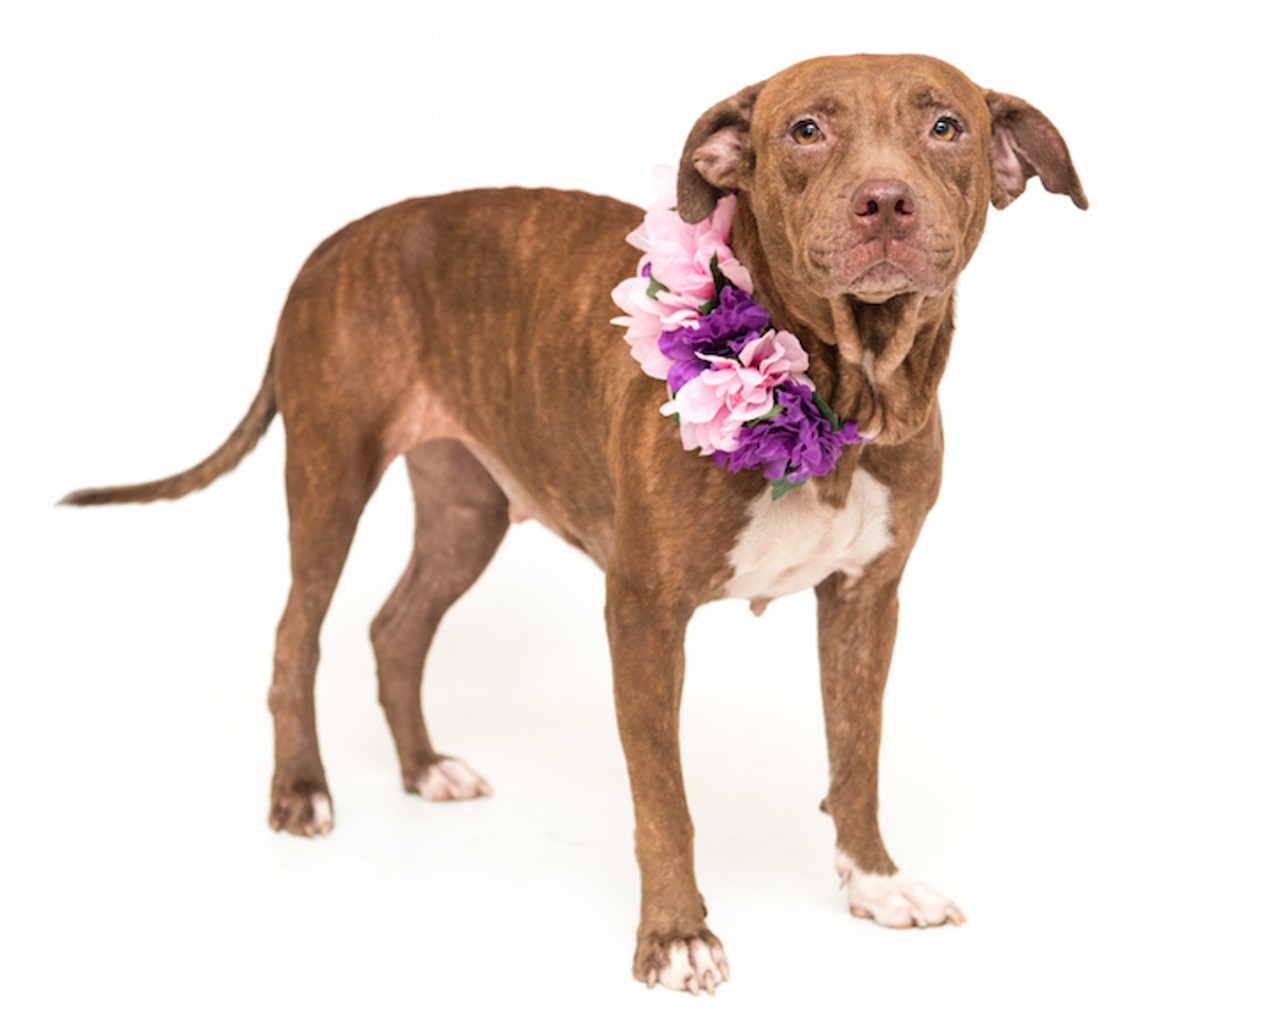 13 adoptable pups available right now at Orange County Animal Services